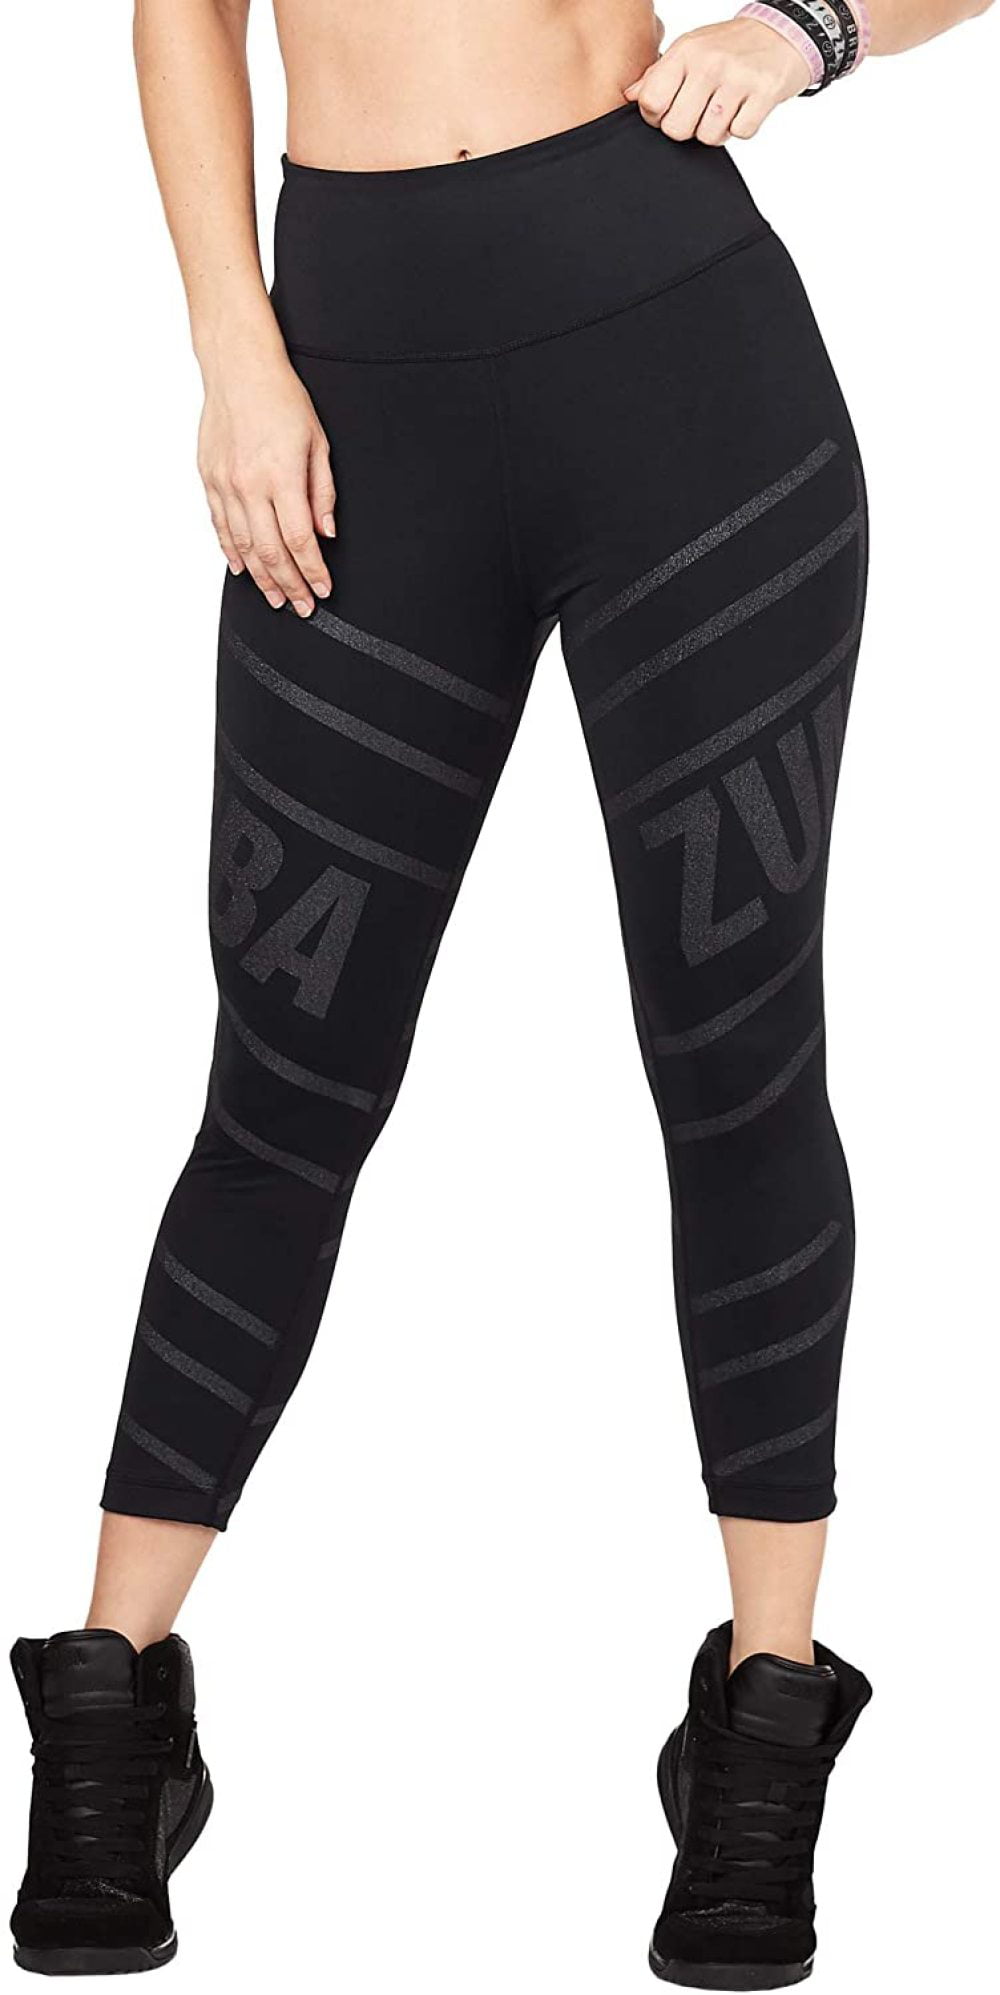 Zumba Wide Waistband Dance Fitness Compression Fit Print Workout Leggings for Women